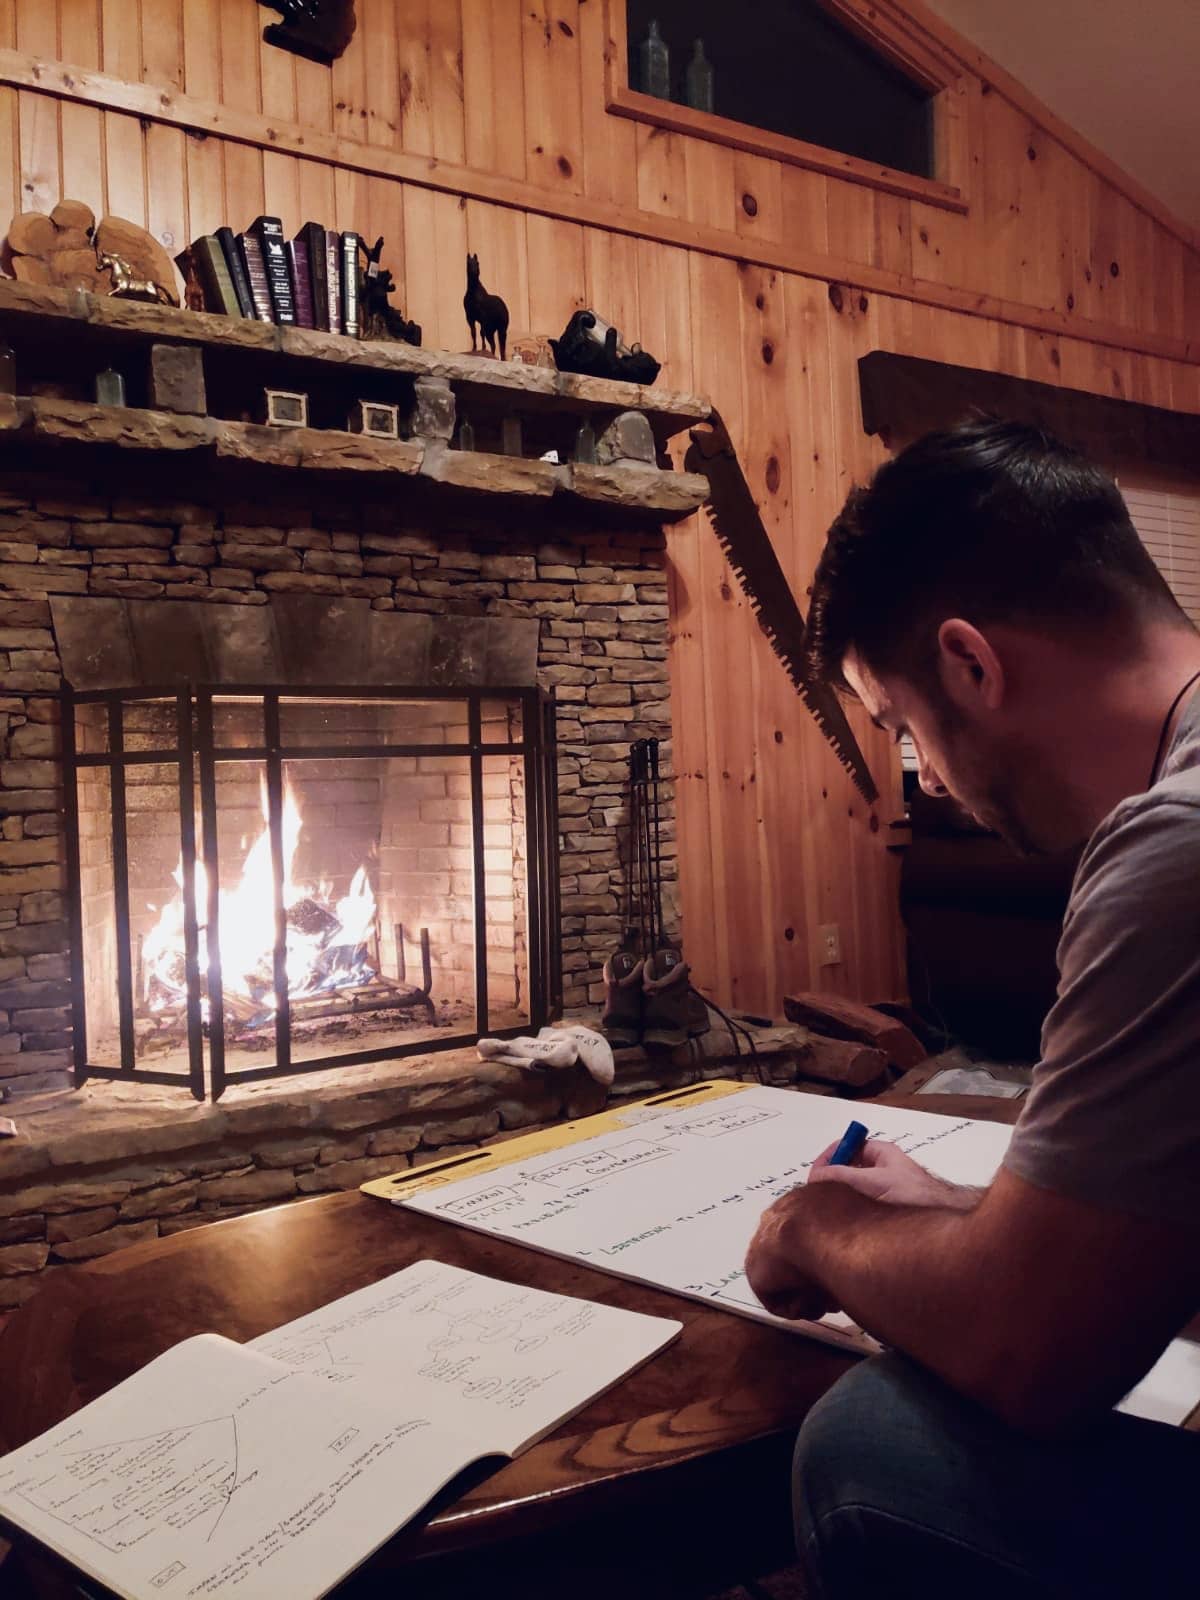 Steven Mindmapping in front of fireplace